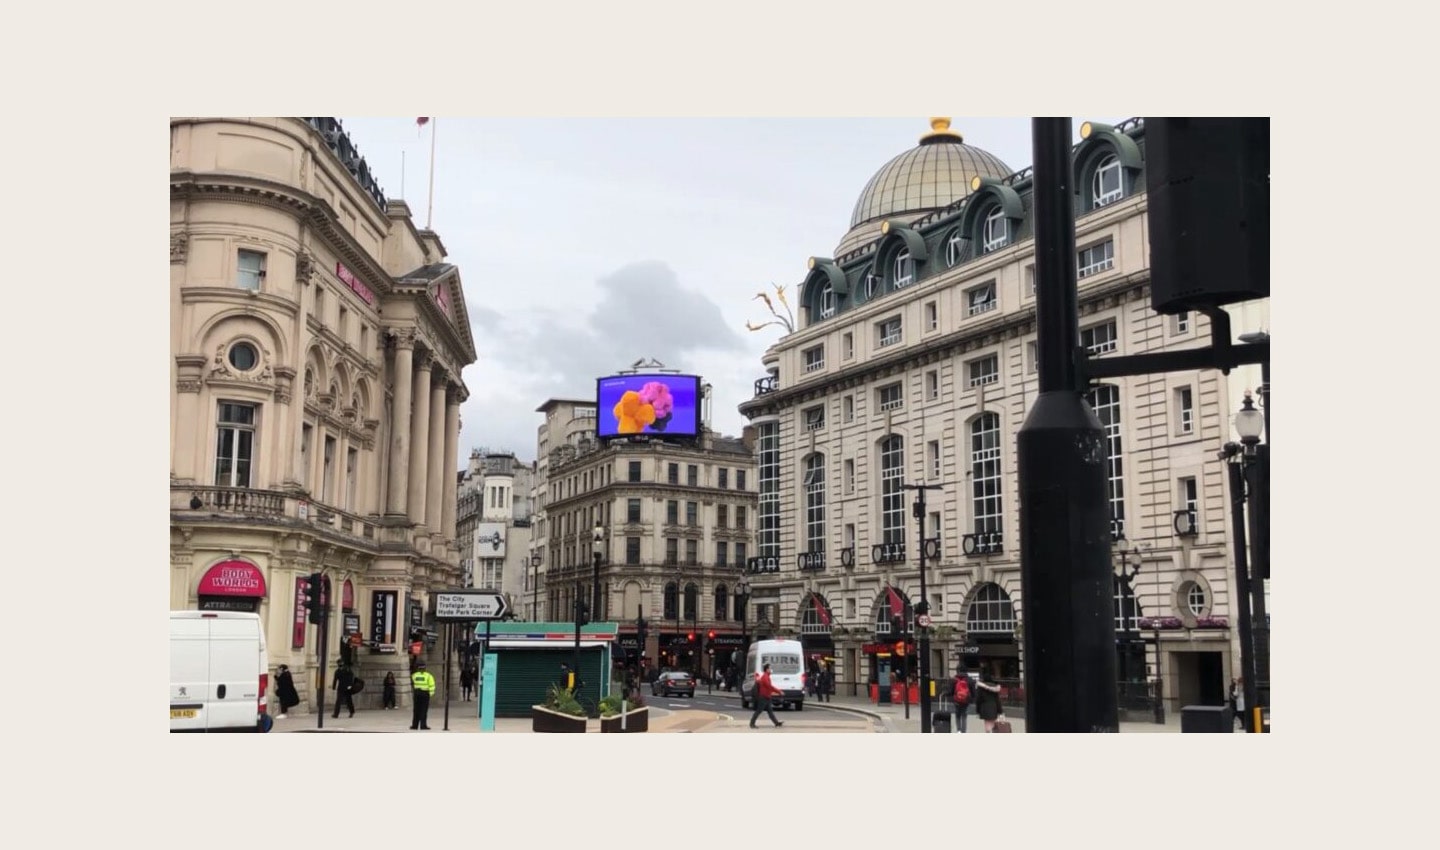 LG's digital billboard in Piccadilly Circus, London displaying an animation representing the function of LG SIGNATURE Washer and Dryer